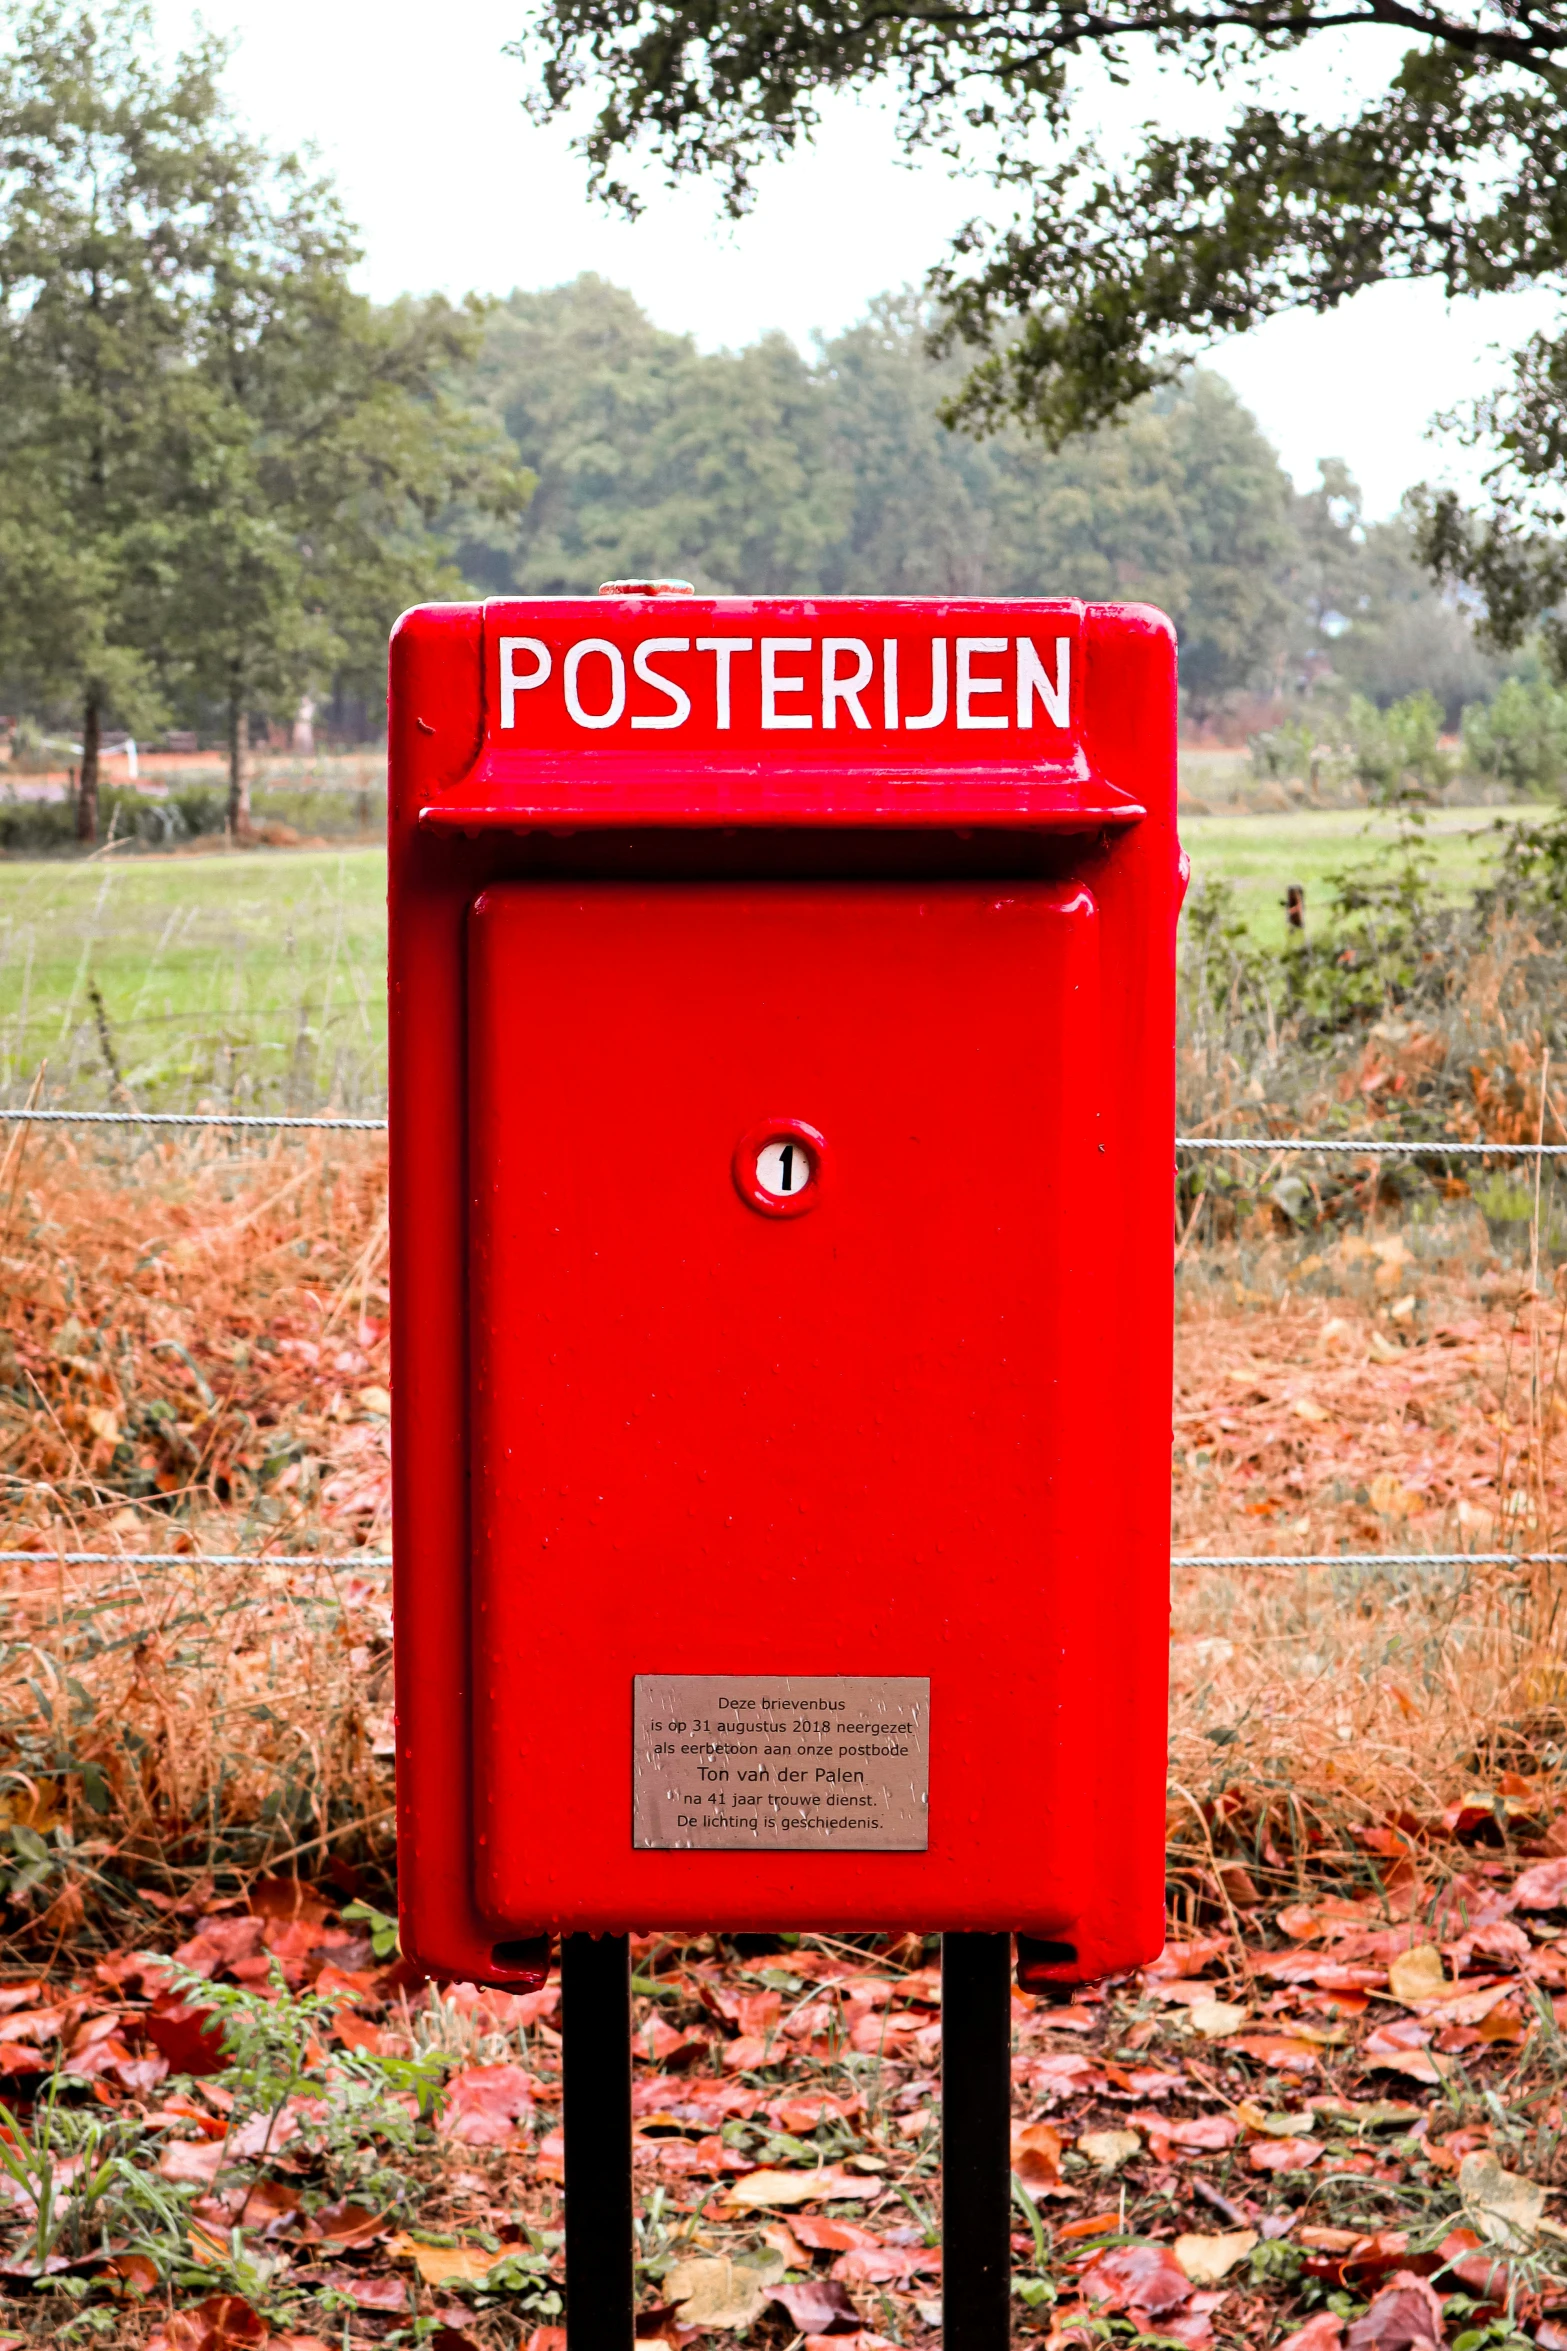 a red post box in a field with many leaves on the ground